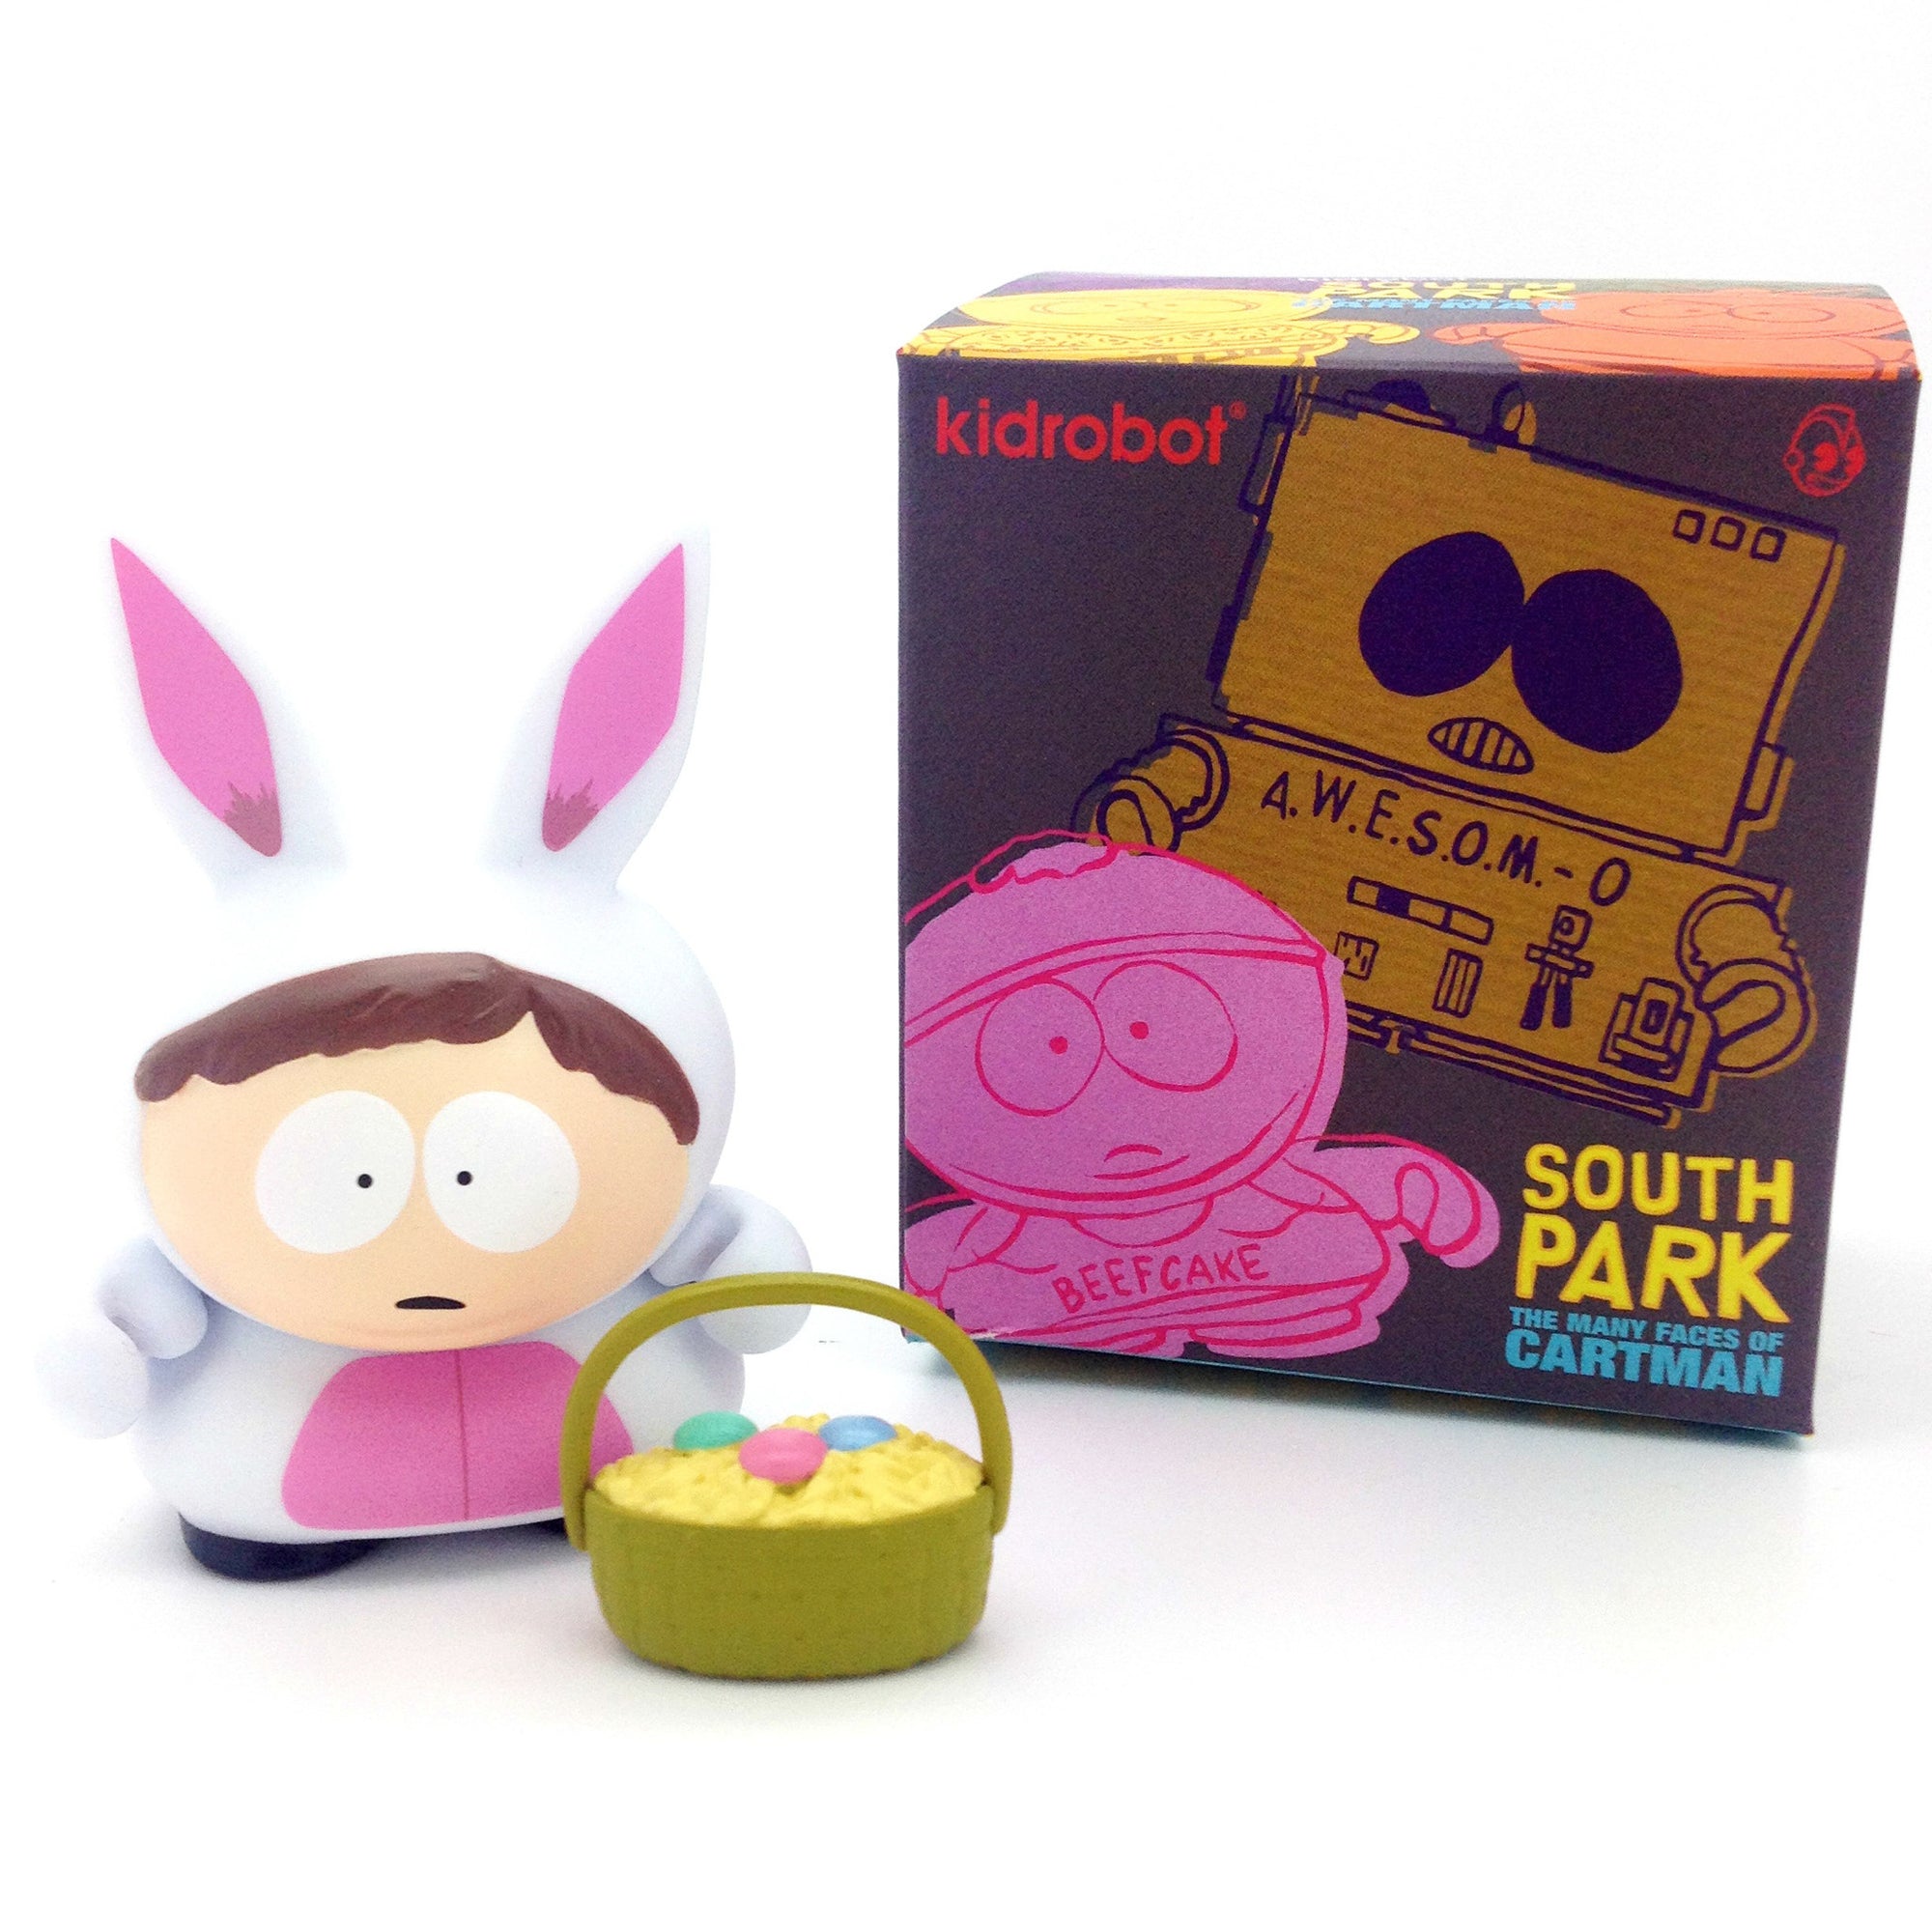 South Park The Many Faces of Cartman Blind Box - Bunny - Mindzai  - 2